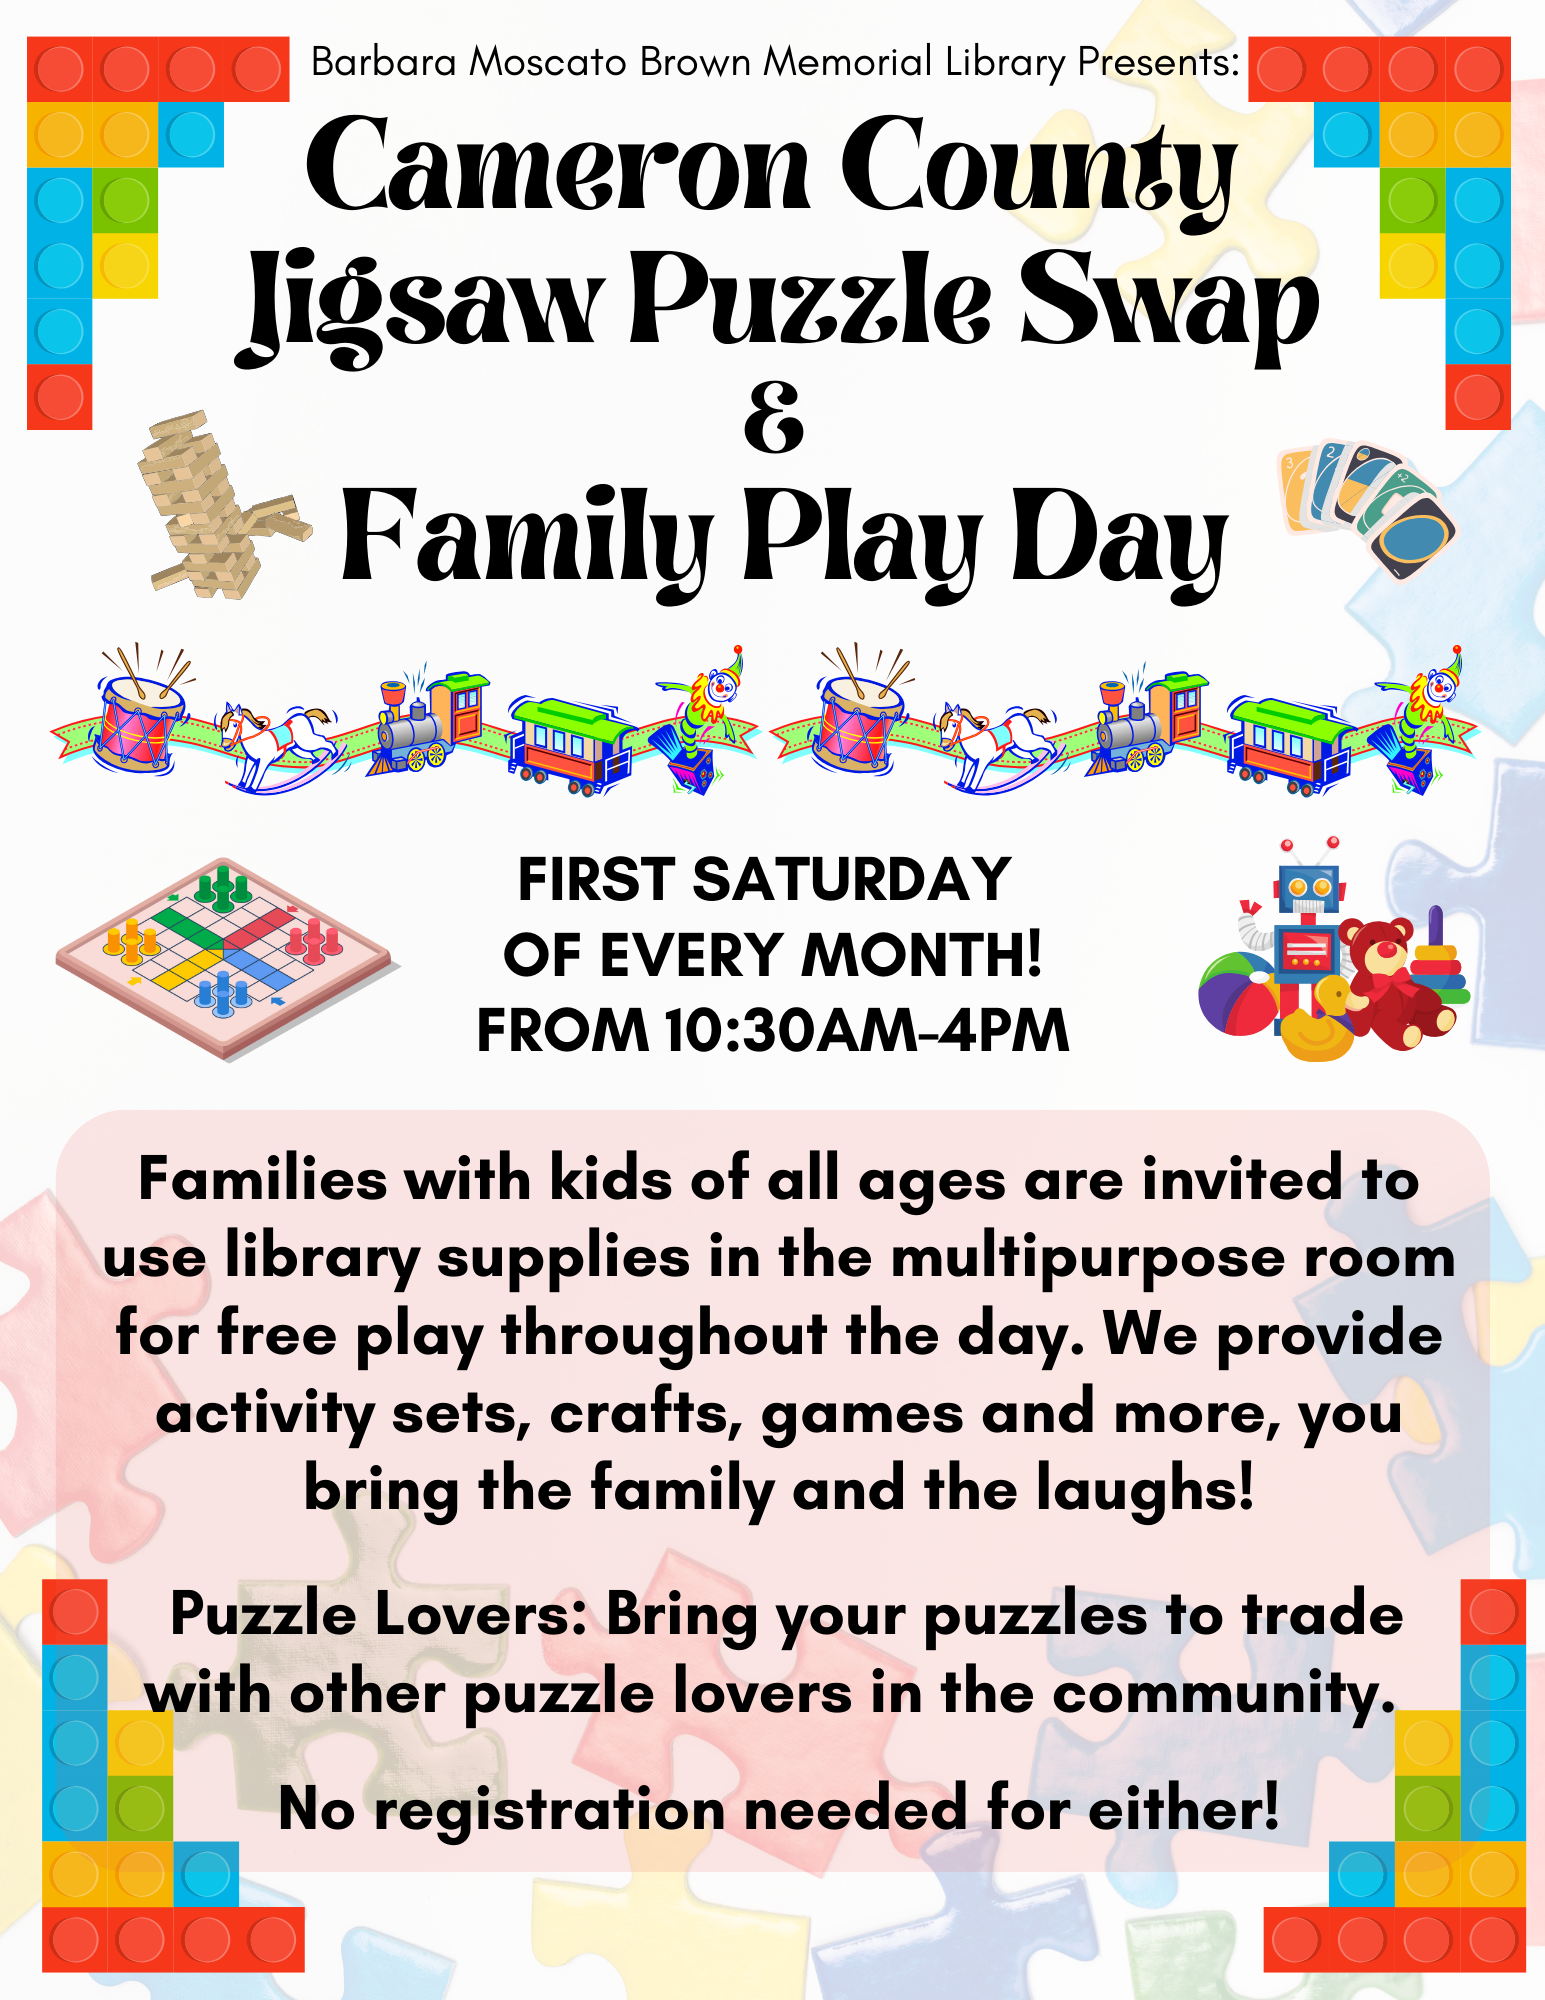 Cameron County Jigsaw Puzzle Swap & Family Play Day First Saturday of Every Month! From 10:30AM-4PM Families with kids of all ages are invited to use library supplies in the multipurpose room for free play throughout the day. We provide activity sets, crafts, games and more, you bring the family and the laughs! Puzzle Lovers: Bring your puzzles to trade with other puzzle lovers in the community. No registration needed for either!